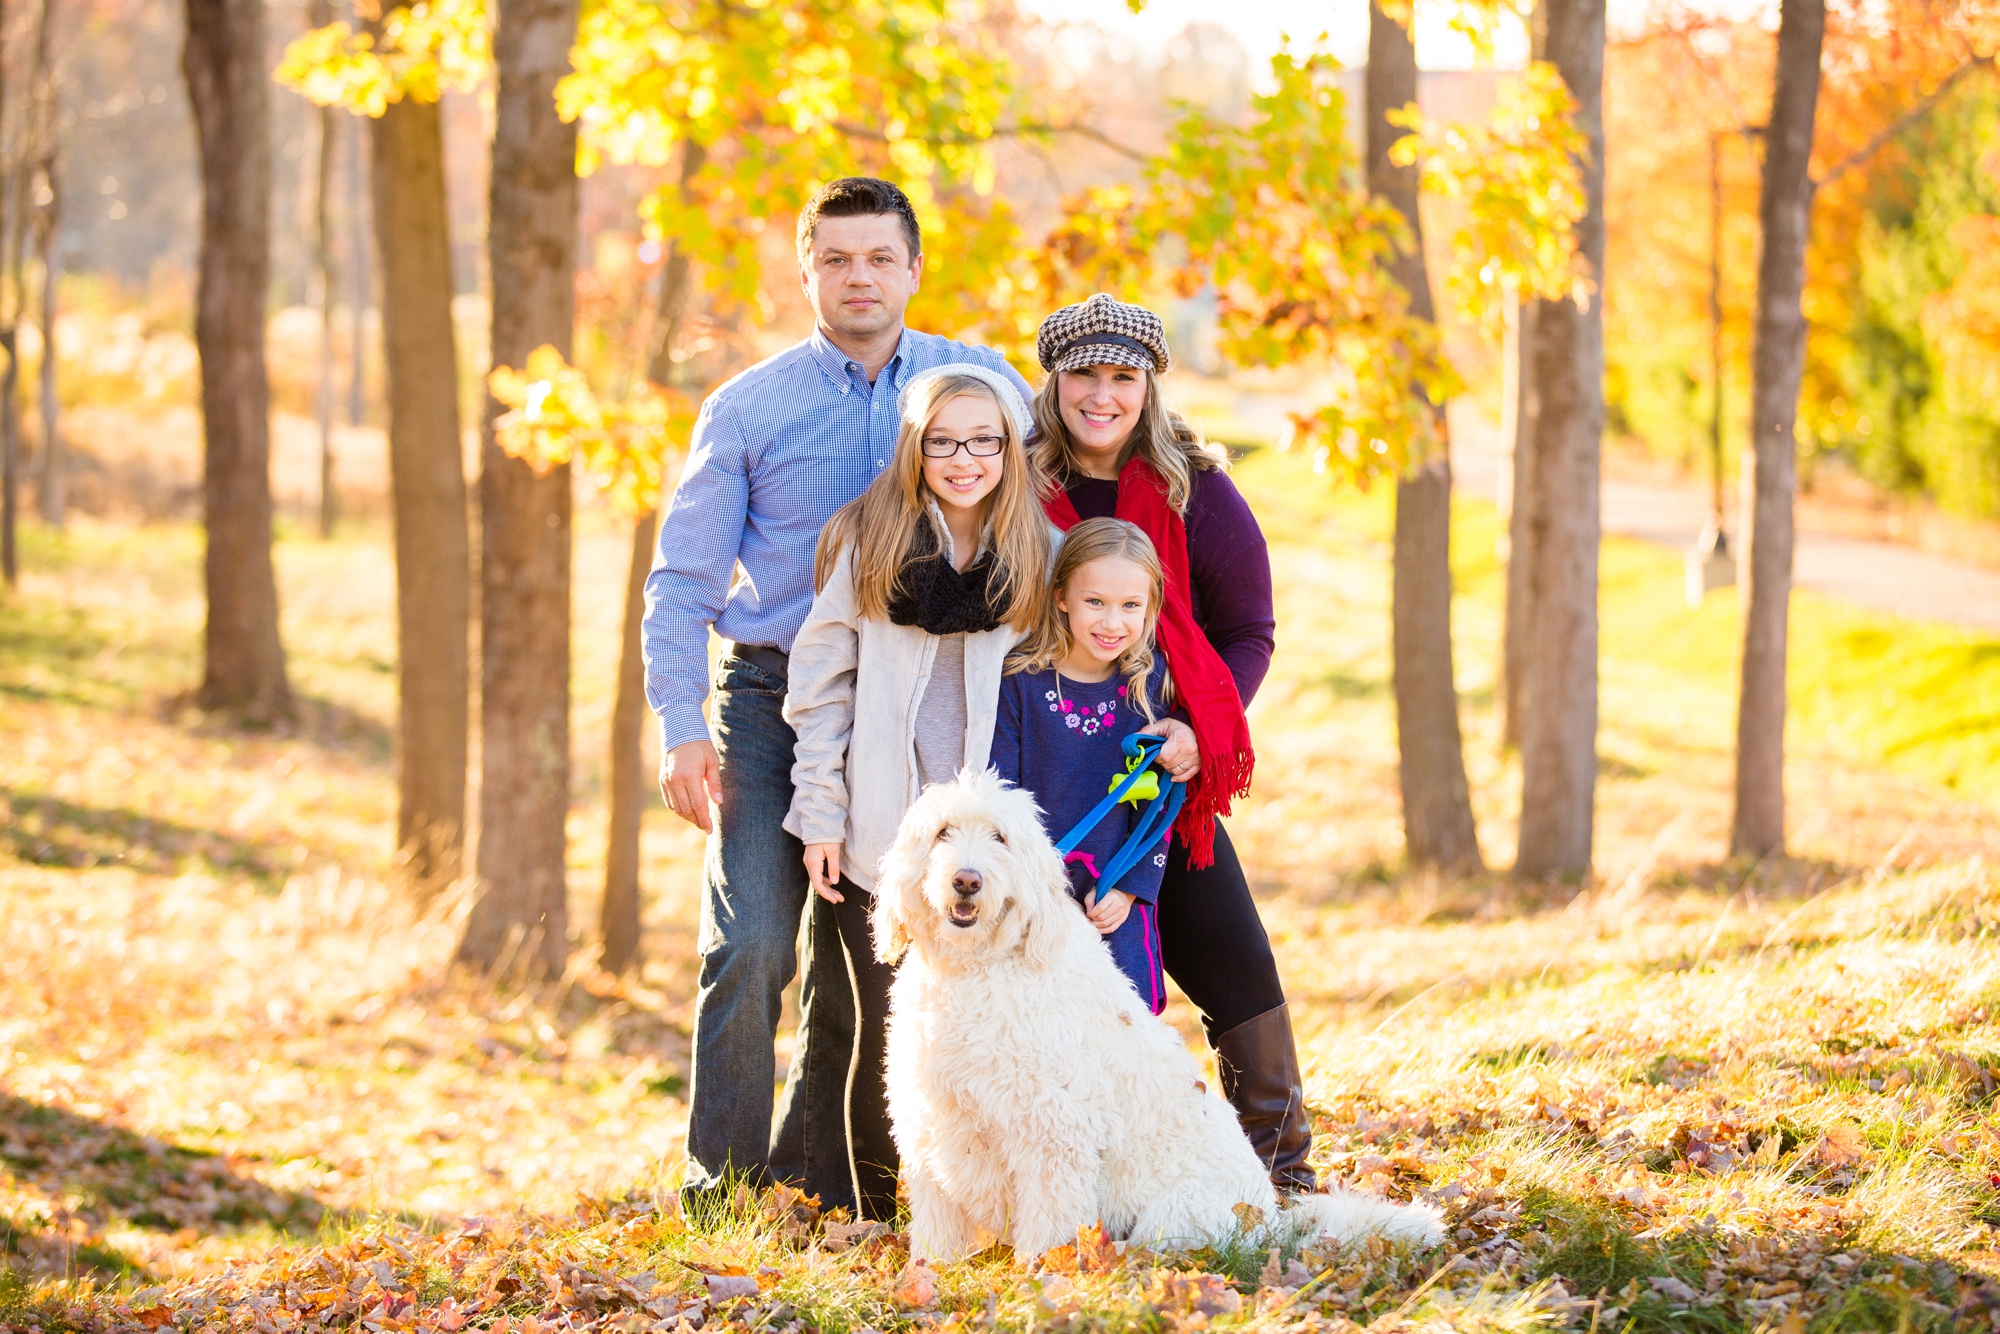 cranberry township family photographer, cranberry township family photos, cranberry township family photos, cranberry township family pictures, cranberry township family pics